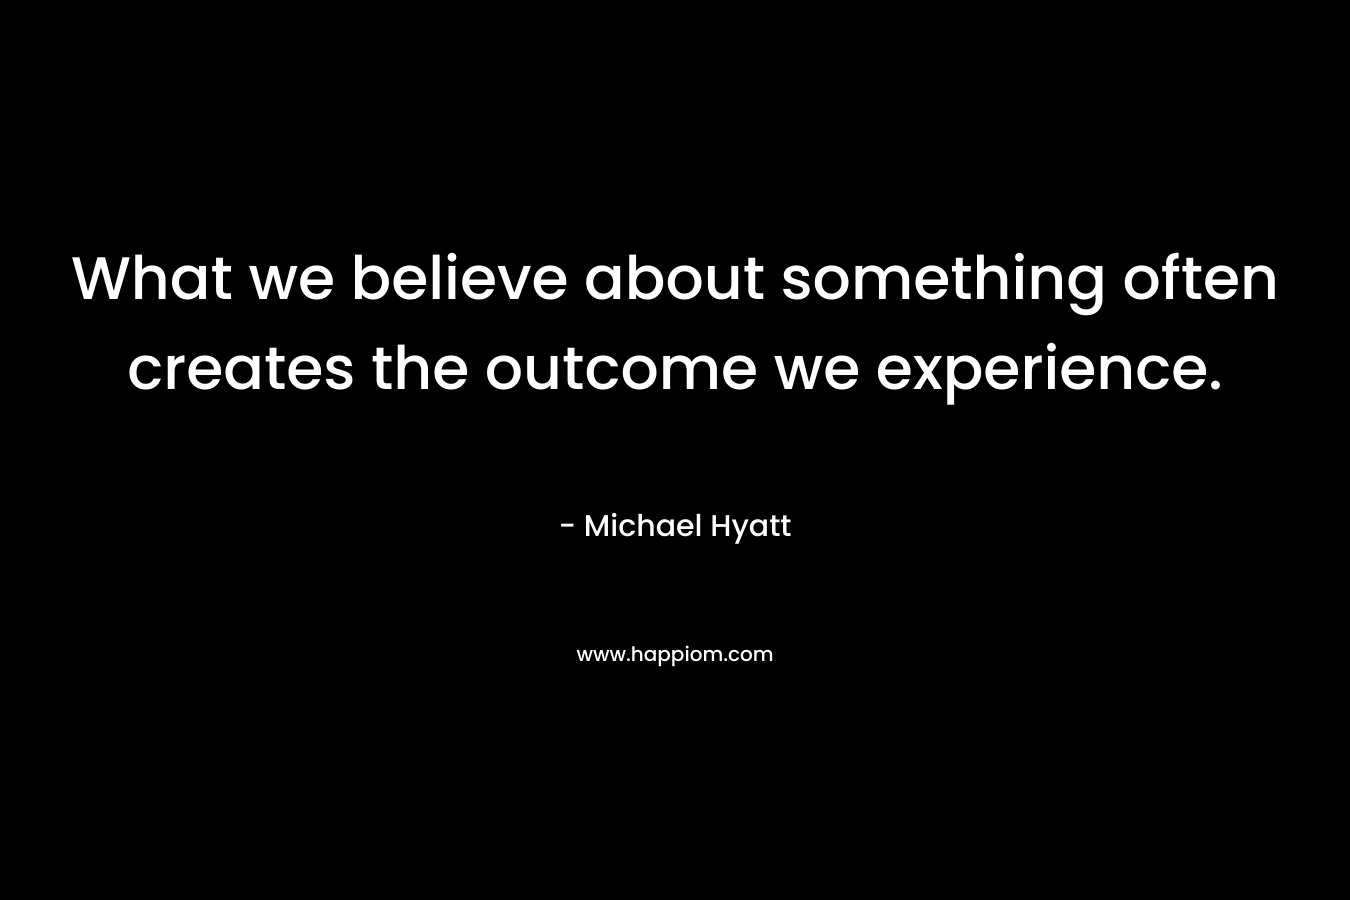 What we believe about something often creates the outcome we experience.